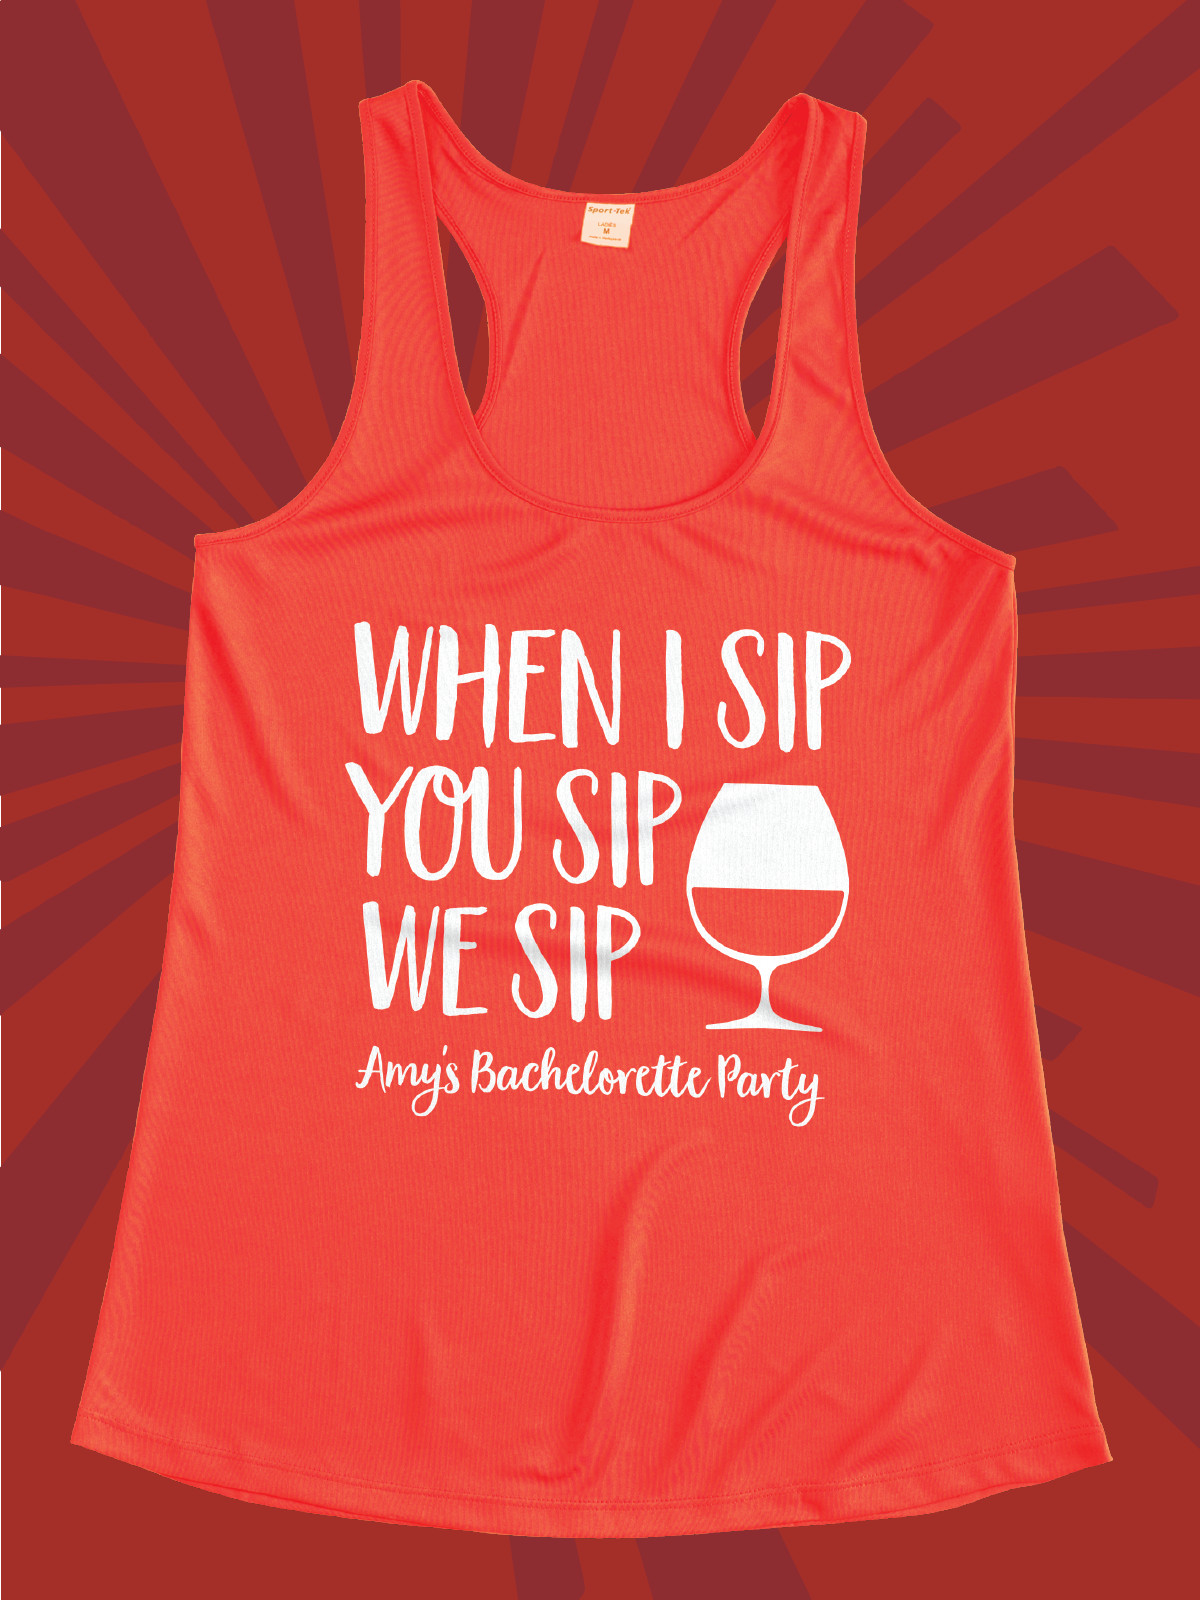 Bachelorette Party Shirts Ideas
 Funny and Trendy Bachelor & Bachelorette Party Shirts